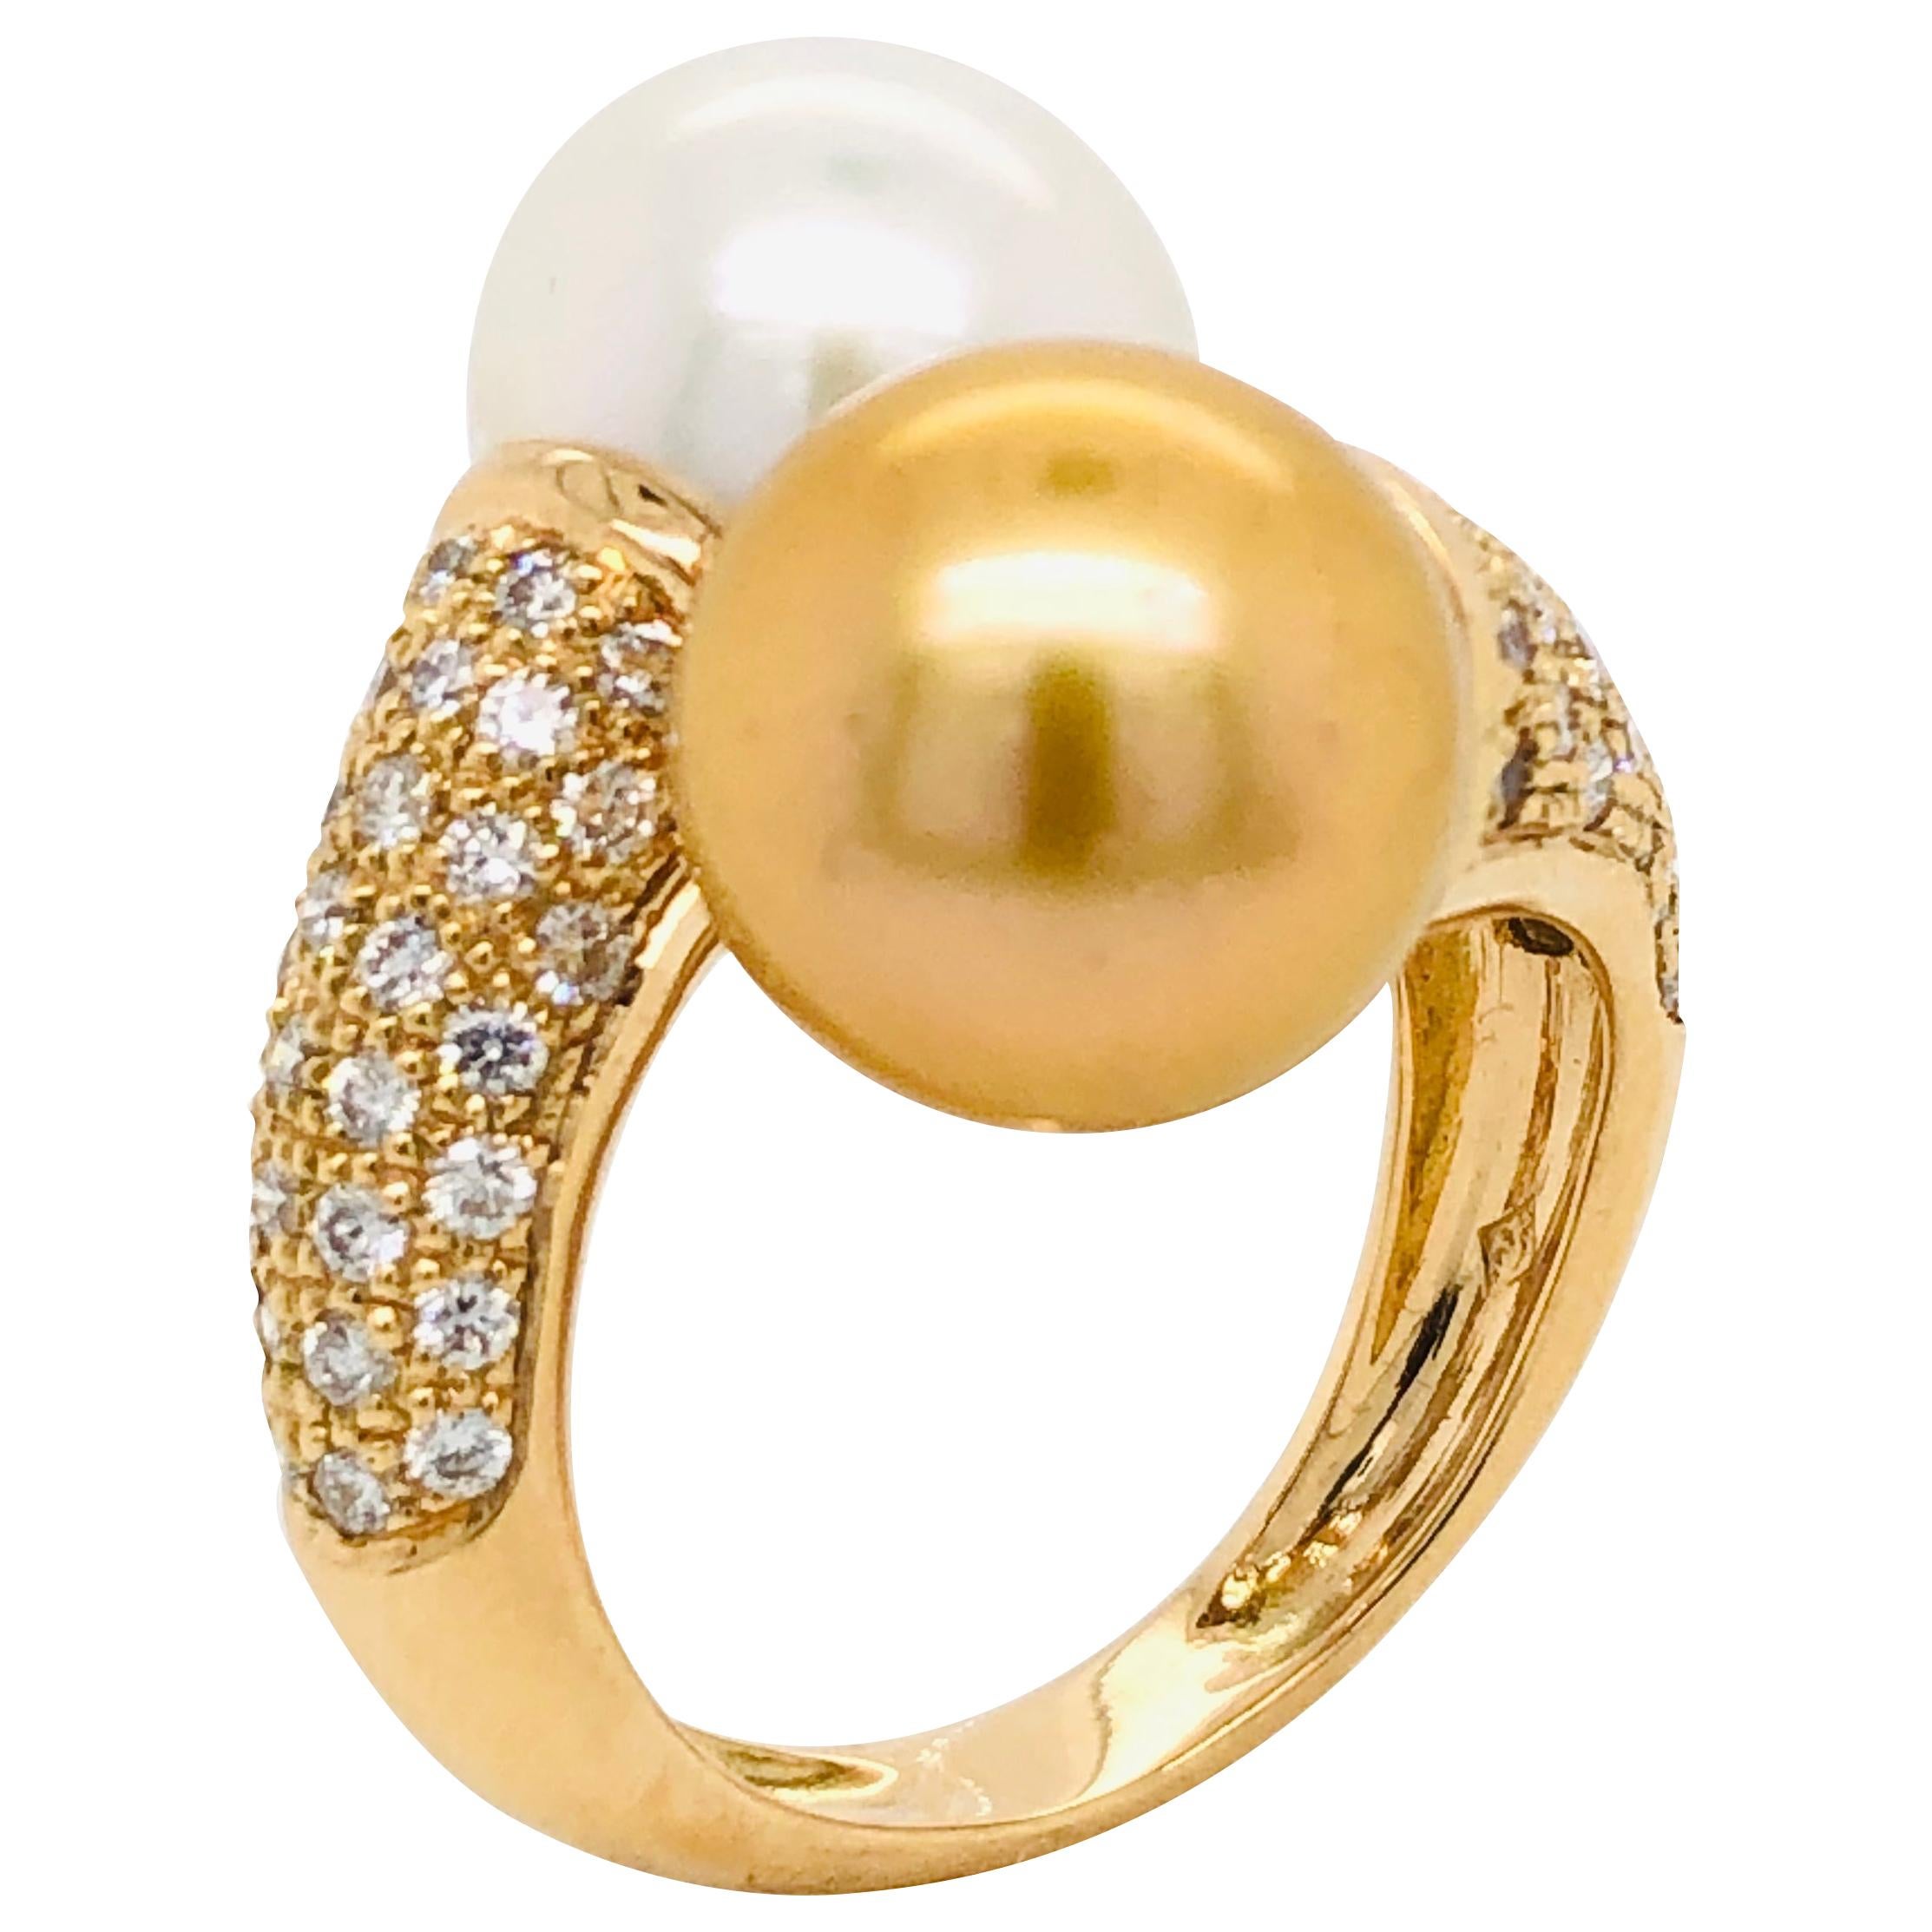 South Sea Pearls with White Diamonds on Gold 18 Carat Ring